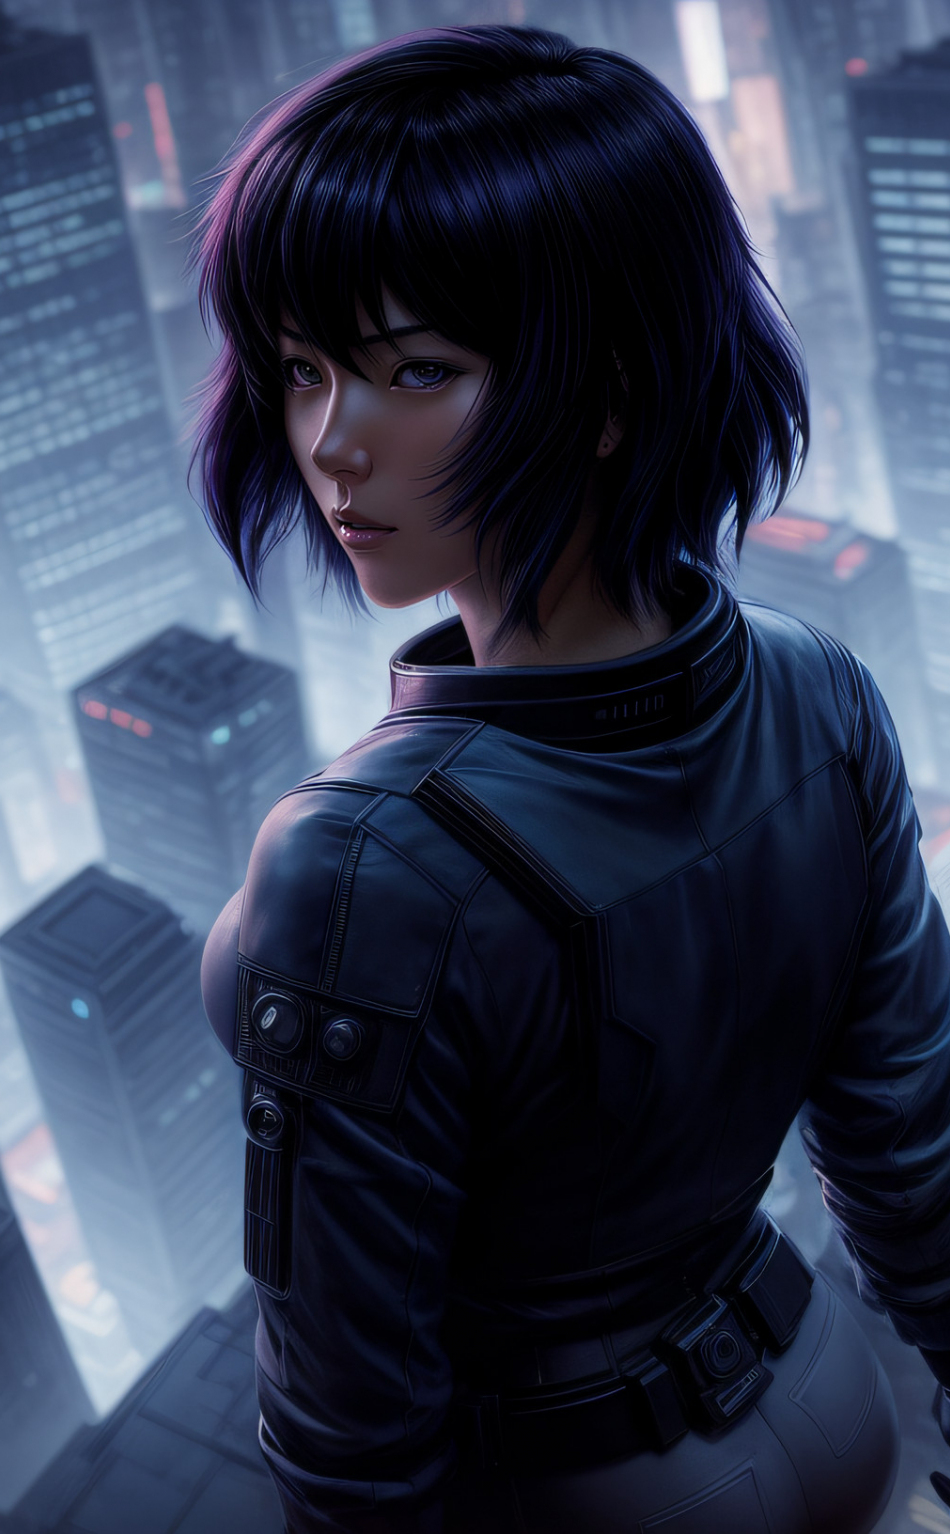 Beautiful girl, Ghost in the Shell, anime art, 950x1534 wallpaper